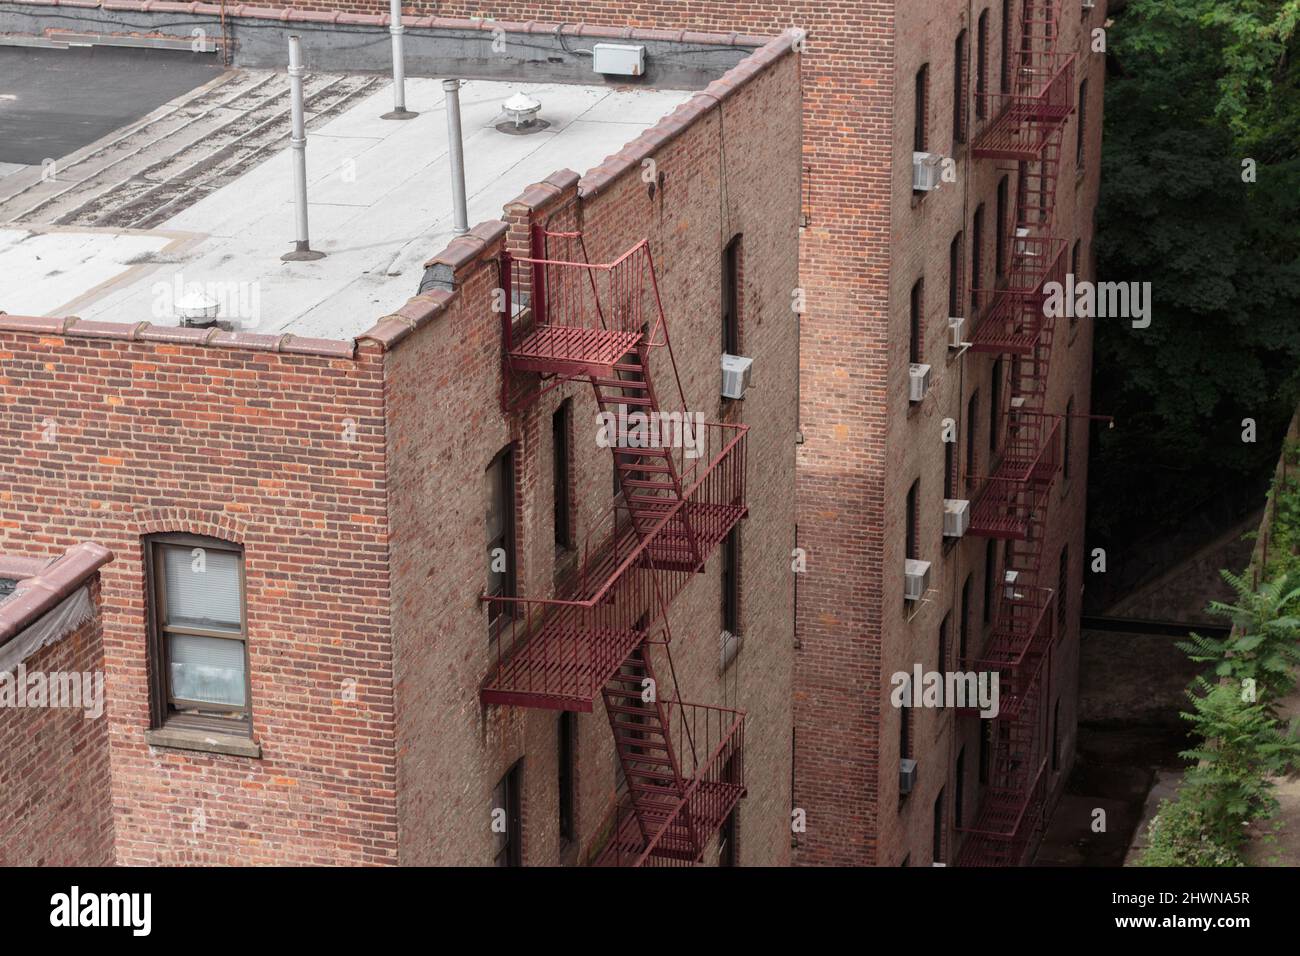 back of non-descript, generic looking red brick apartment buildings with fire escapes and window air conditioning units Stock Photo